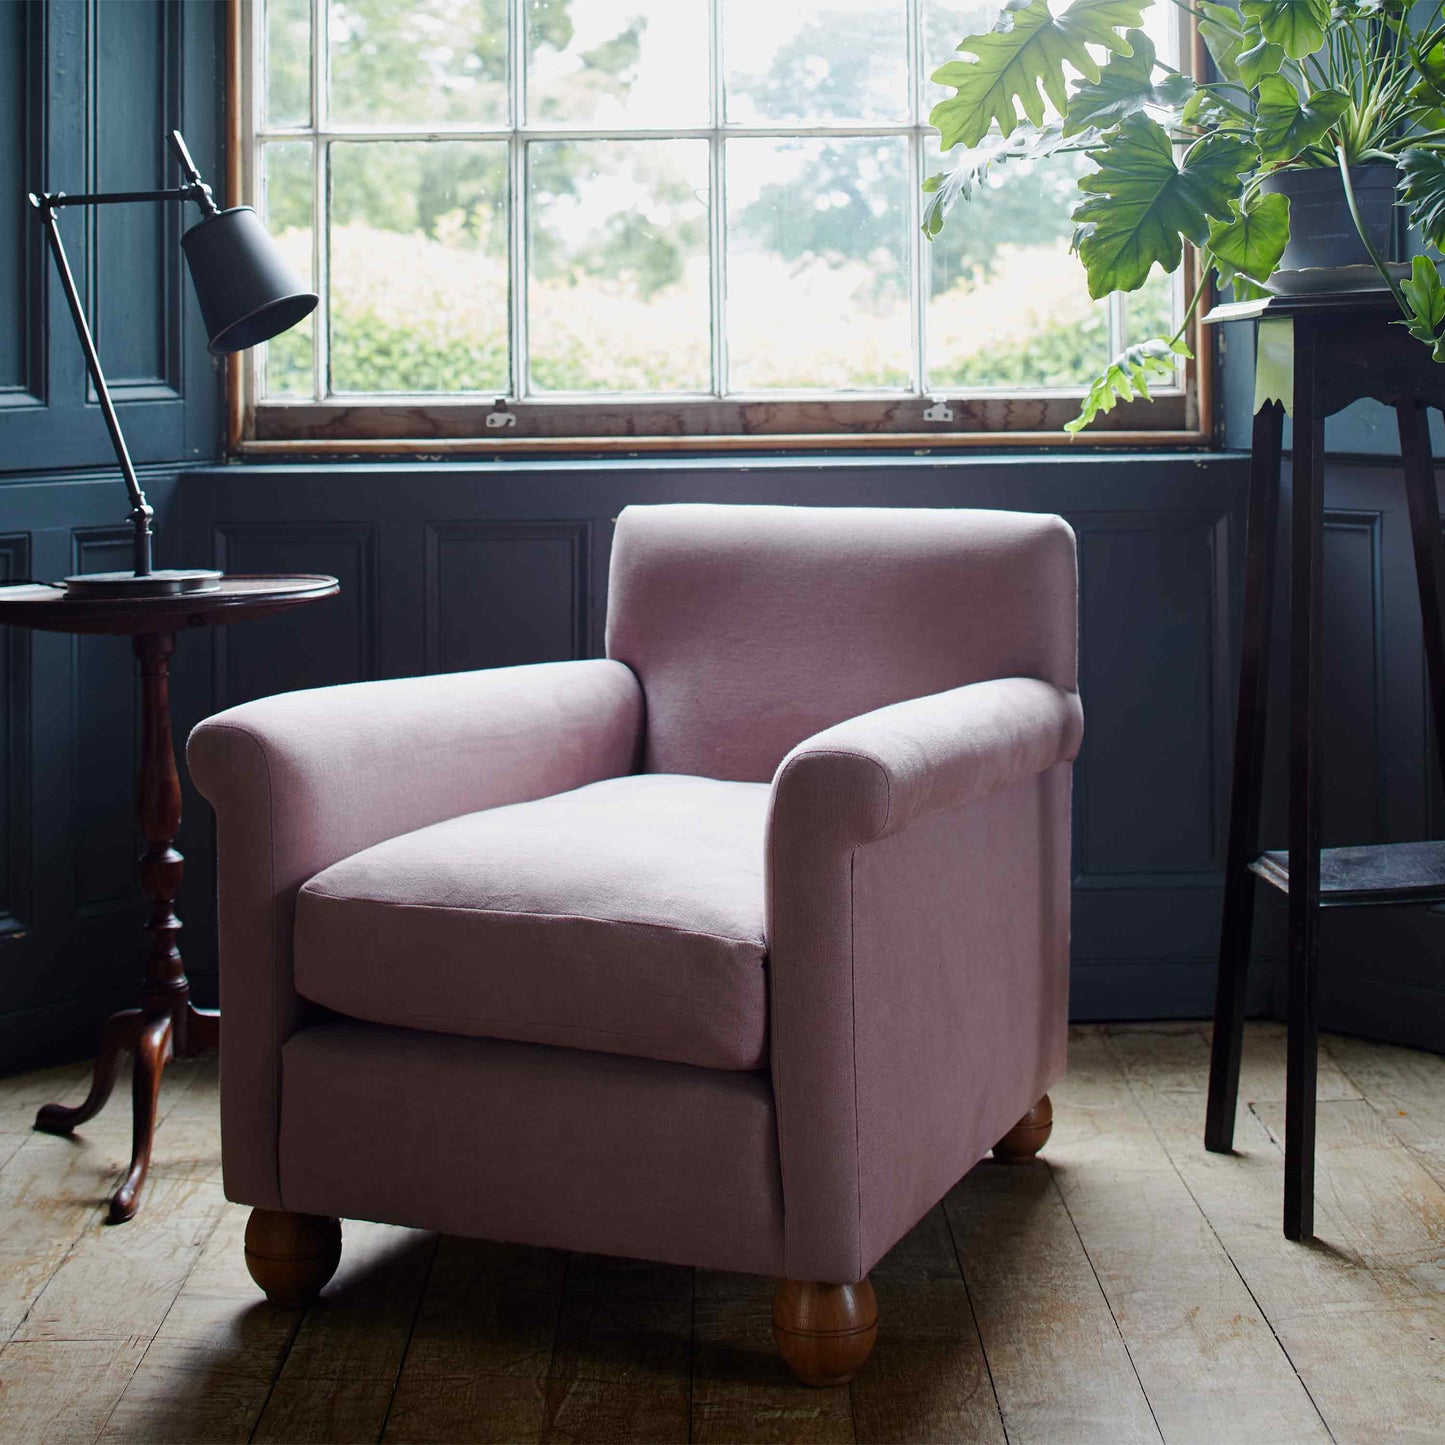 Idler Armchair in Laidback Linen Dusky Pink